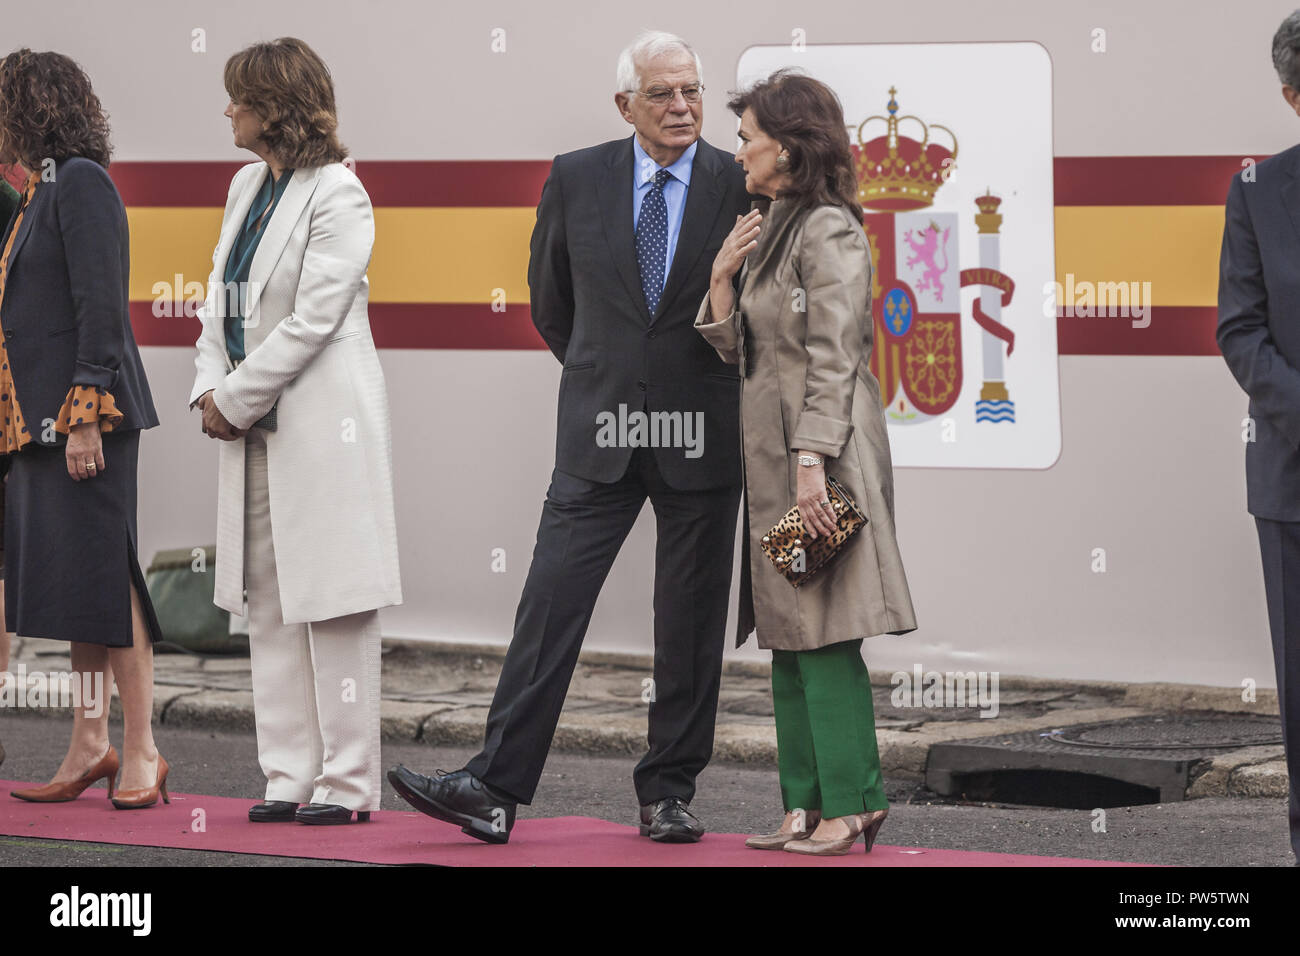 Madrid, Madrid, Spain. 12th Oct, 2018. Josep Borrell, center, minister of Foreign Affaires of Spain, during the ceremony of the Hispanic Day in Madrid. Credit: Celestino Arce Lavin/ZUMA Wire/Alamy Live News Stock Photo